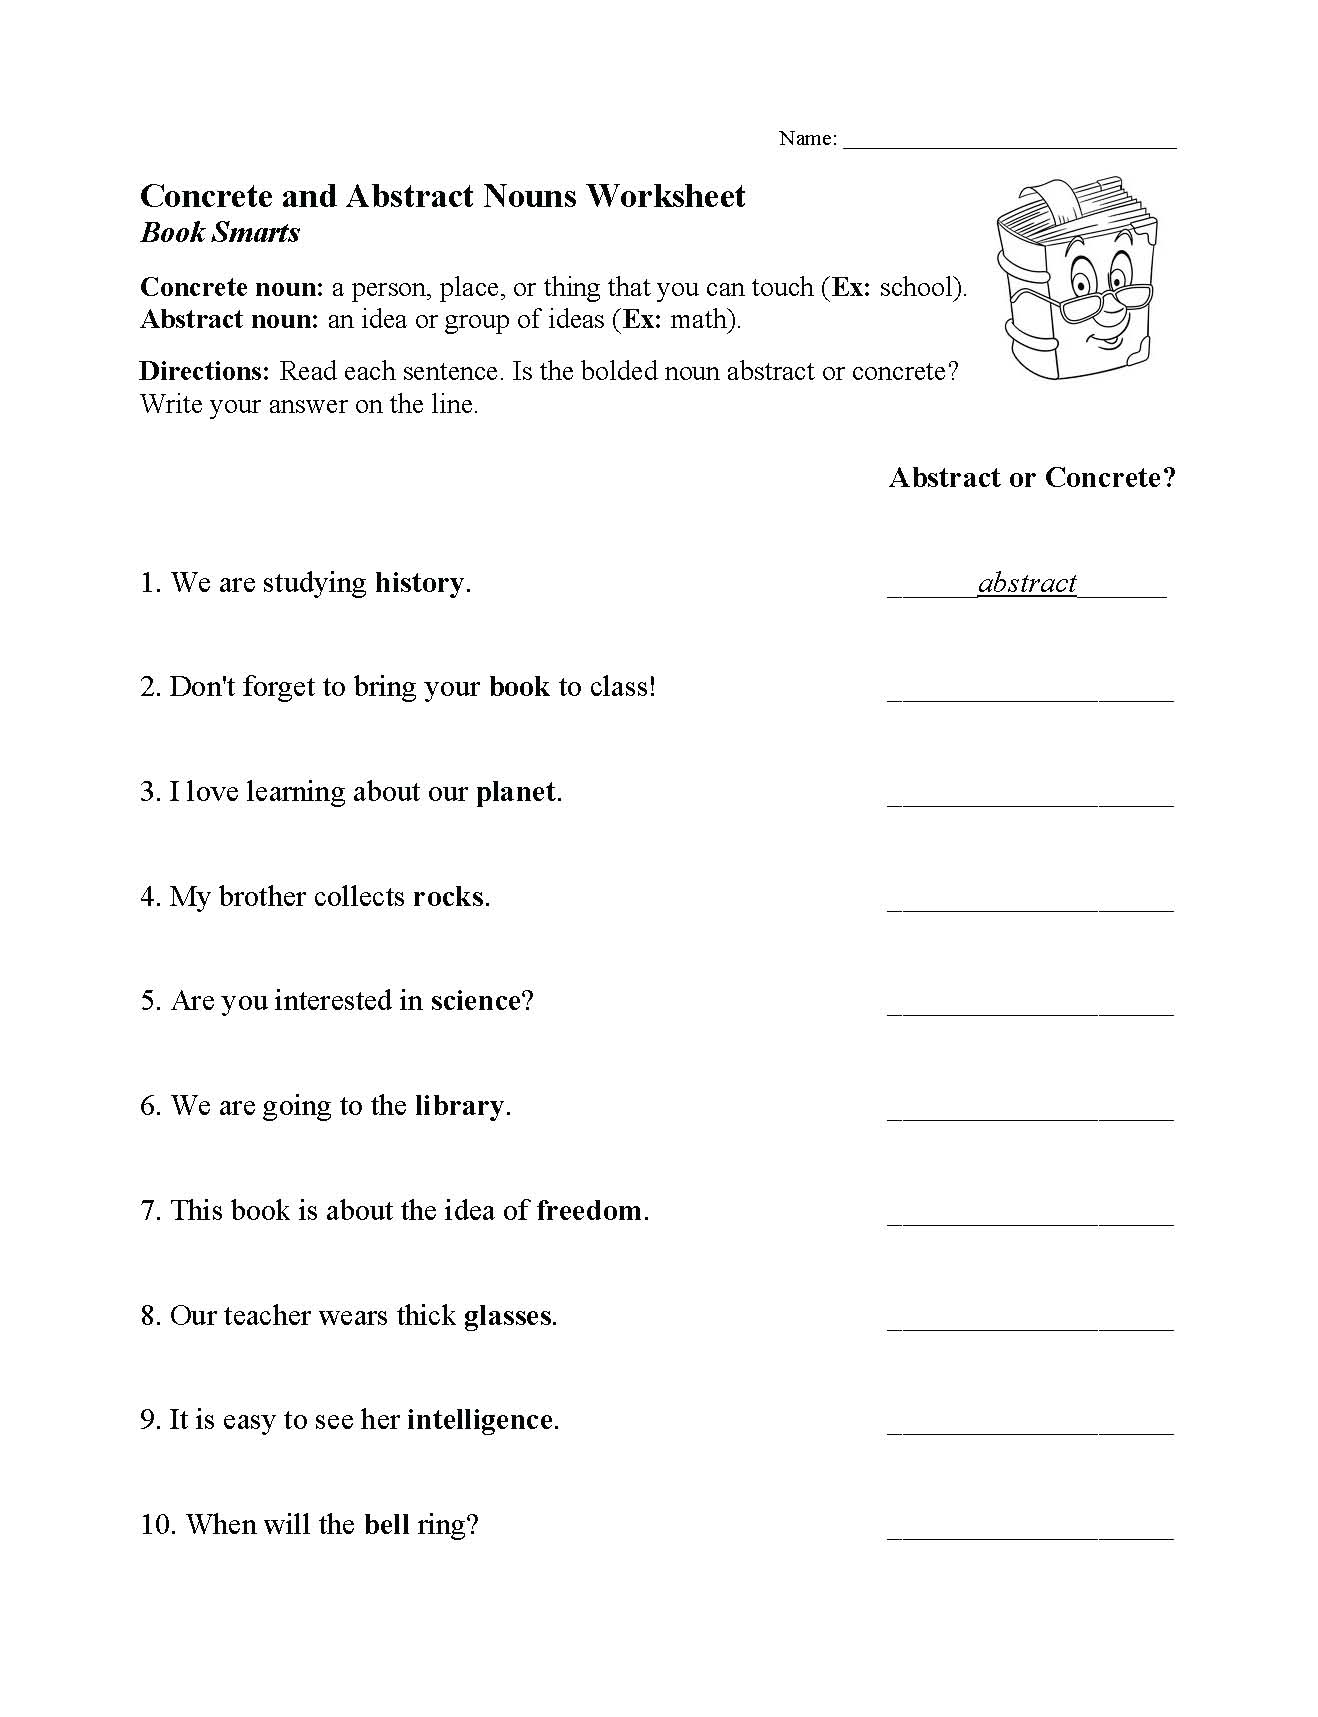 Worksheet On Abstract And Concrete Nouns